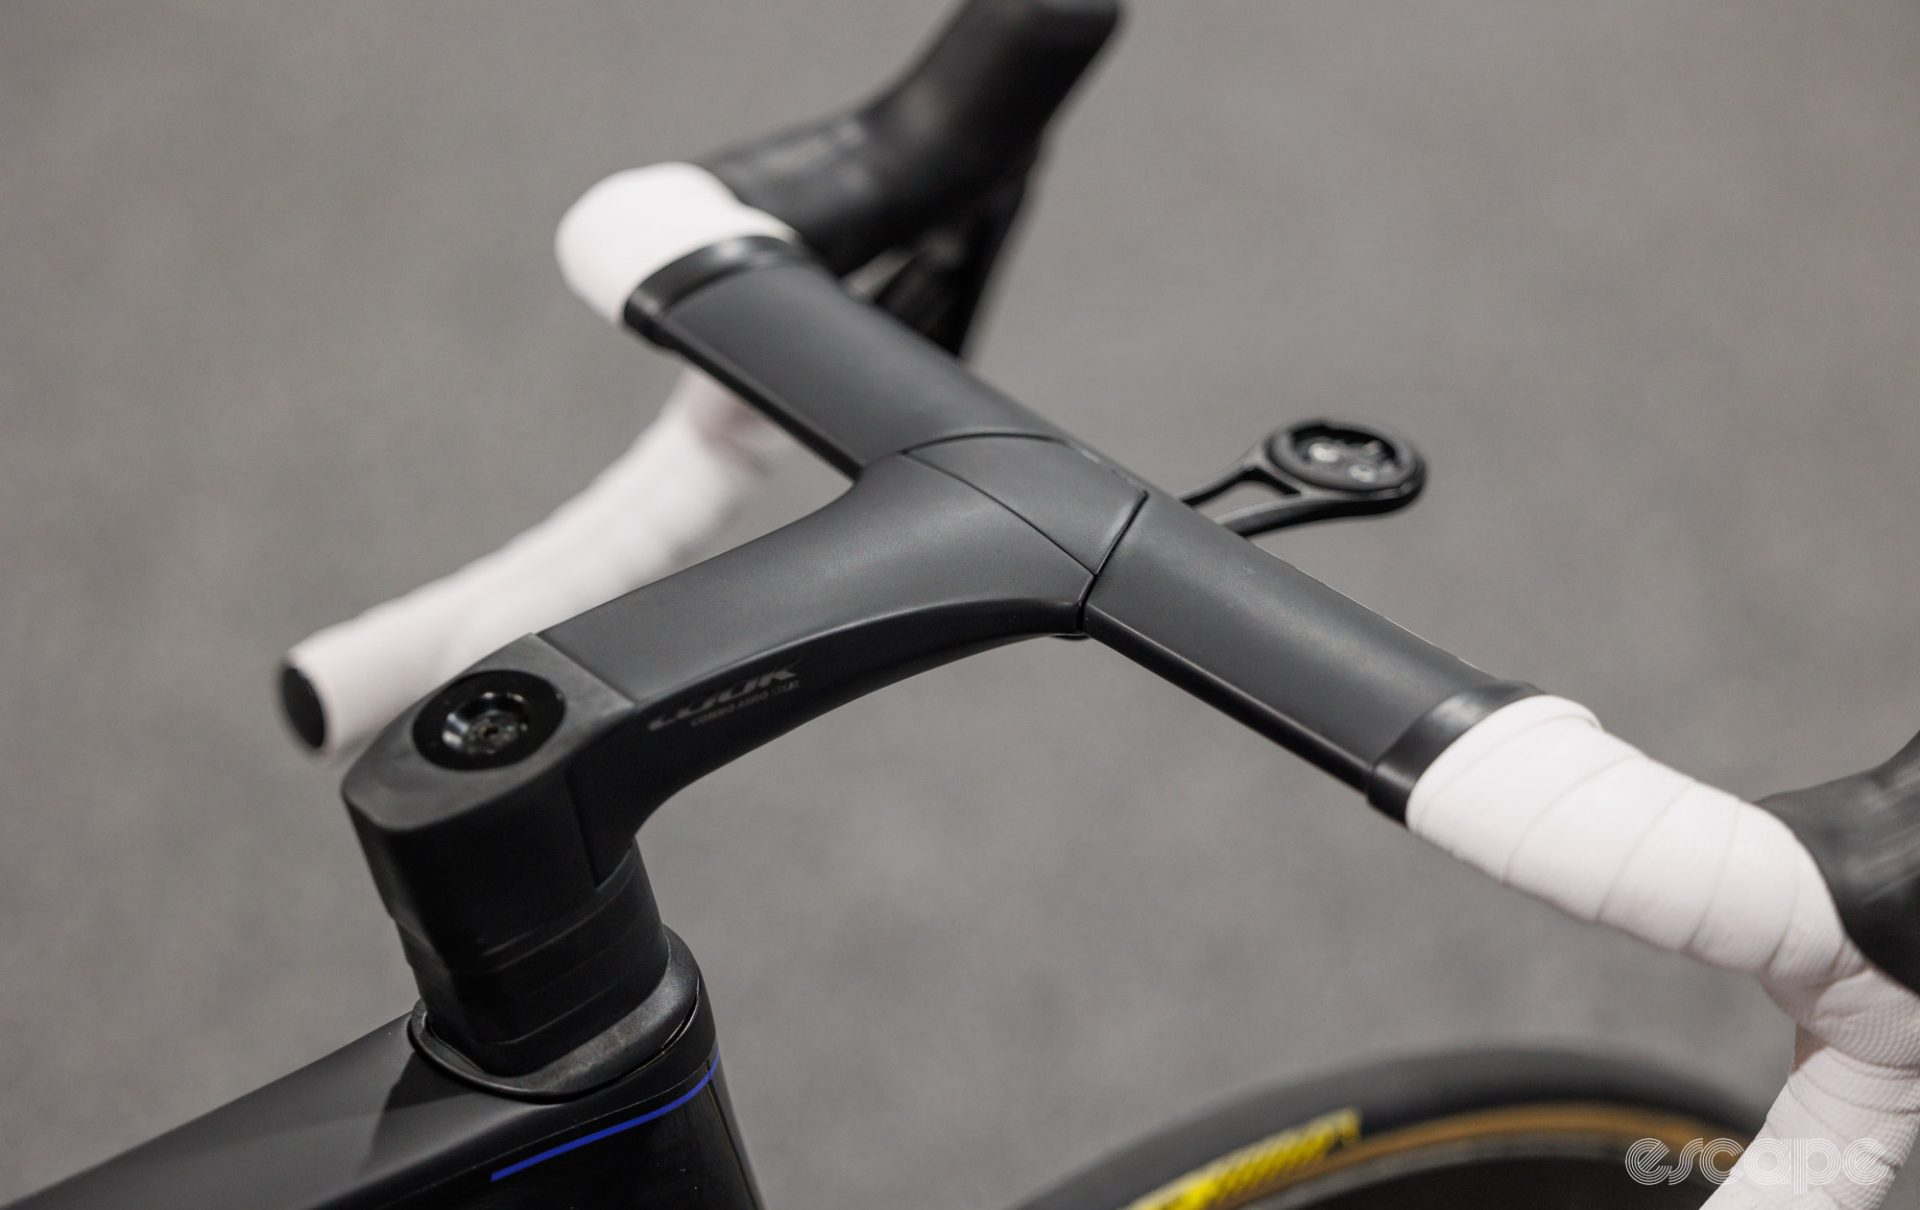 The 795 RS's unique two-piece handlebar/stem, which uses dedicated parts to mimic a one-piece design.